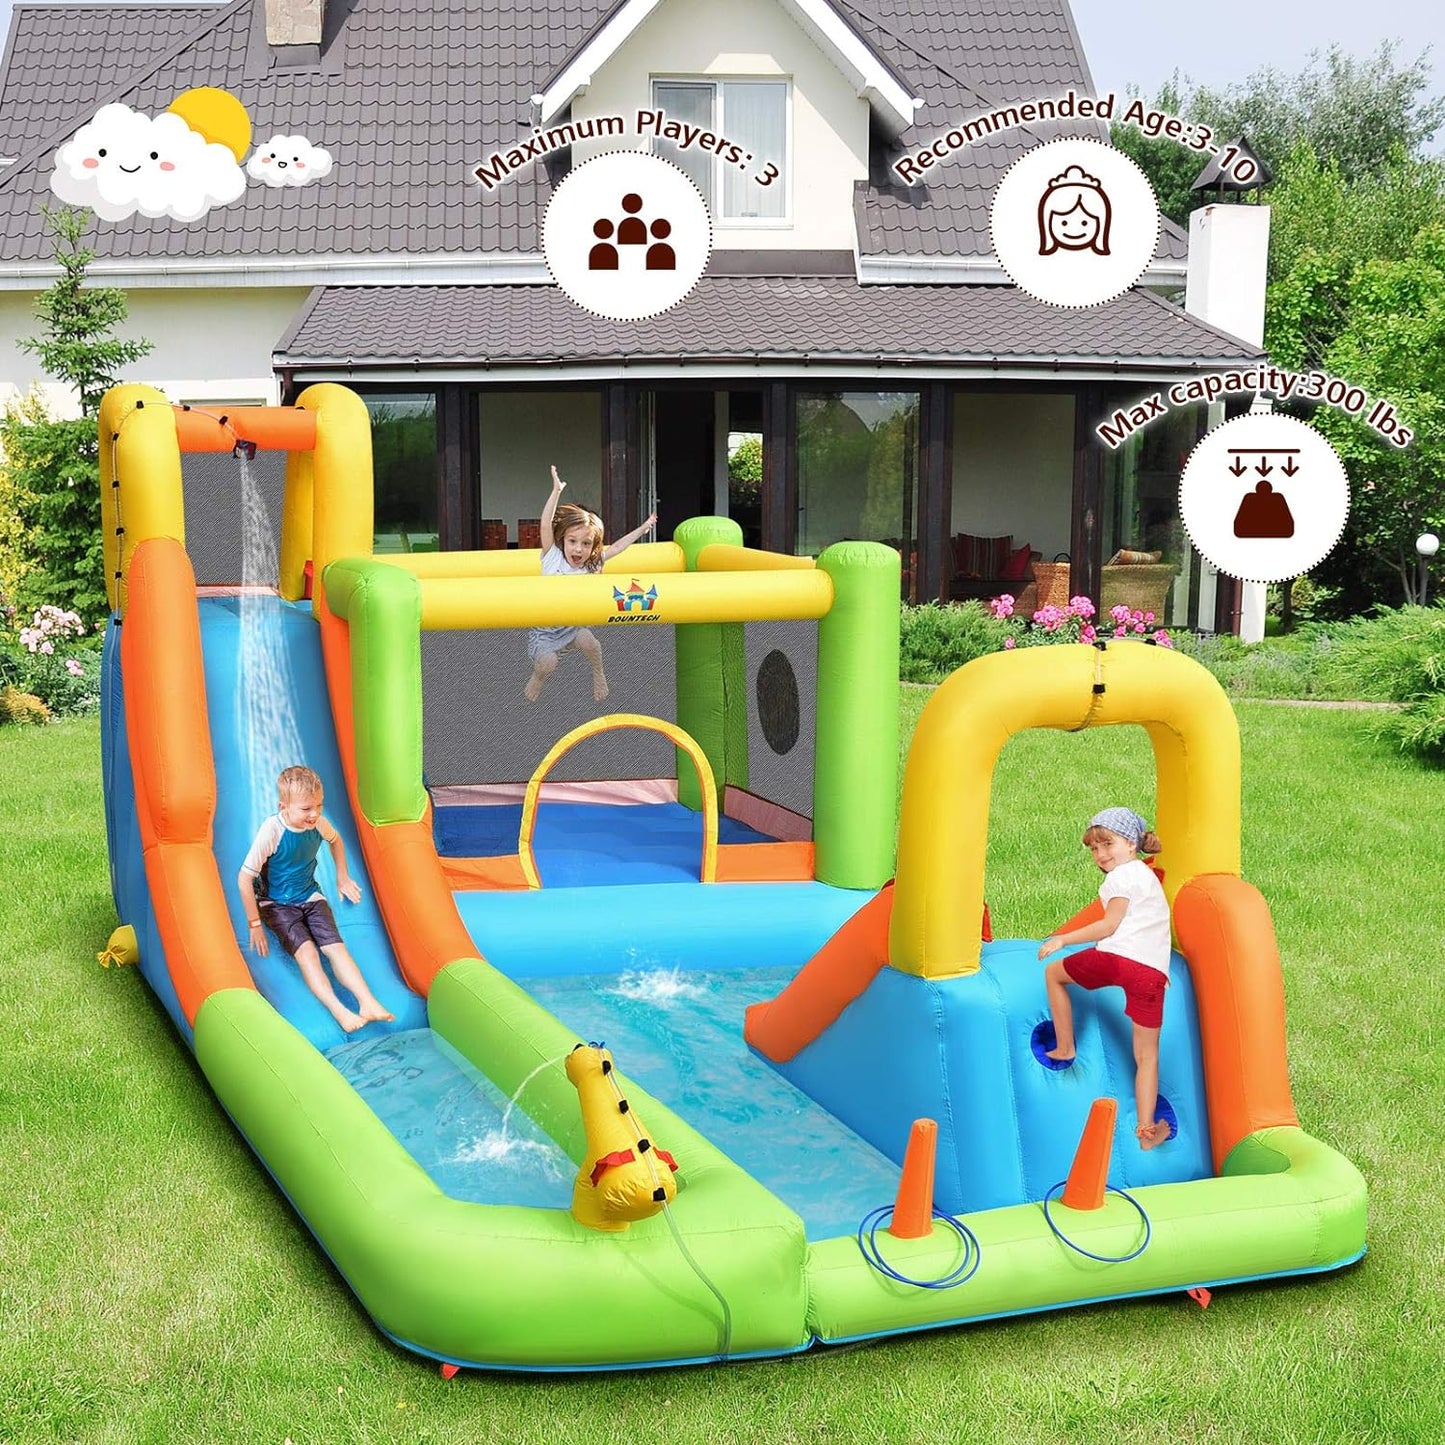 Inflatable Water Slide, 8 in 1 Mega Waterslide Park Bounce House for Outdoor Fun W/735W Blower, Long Slide, Splash Pool, Water Slides Inflatables for Kids and Adults Backyard Party Gifts